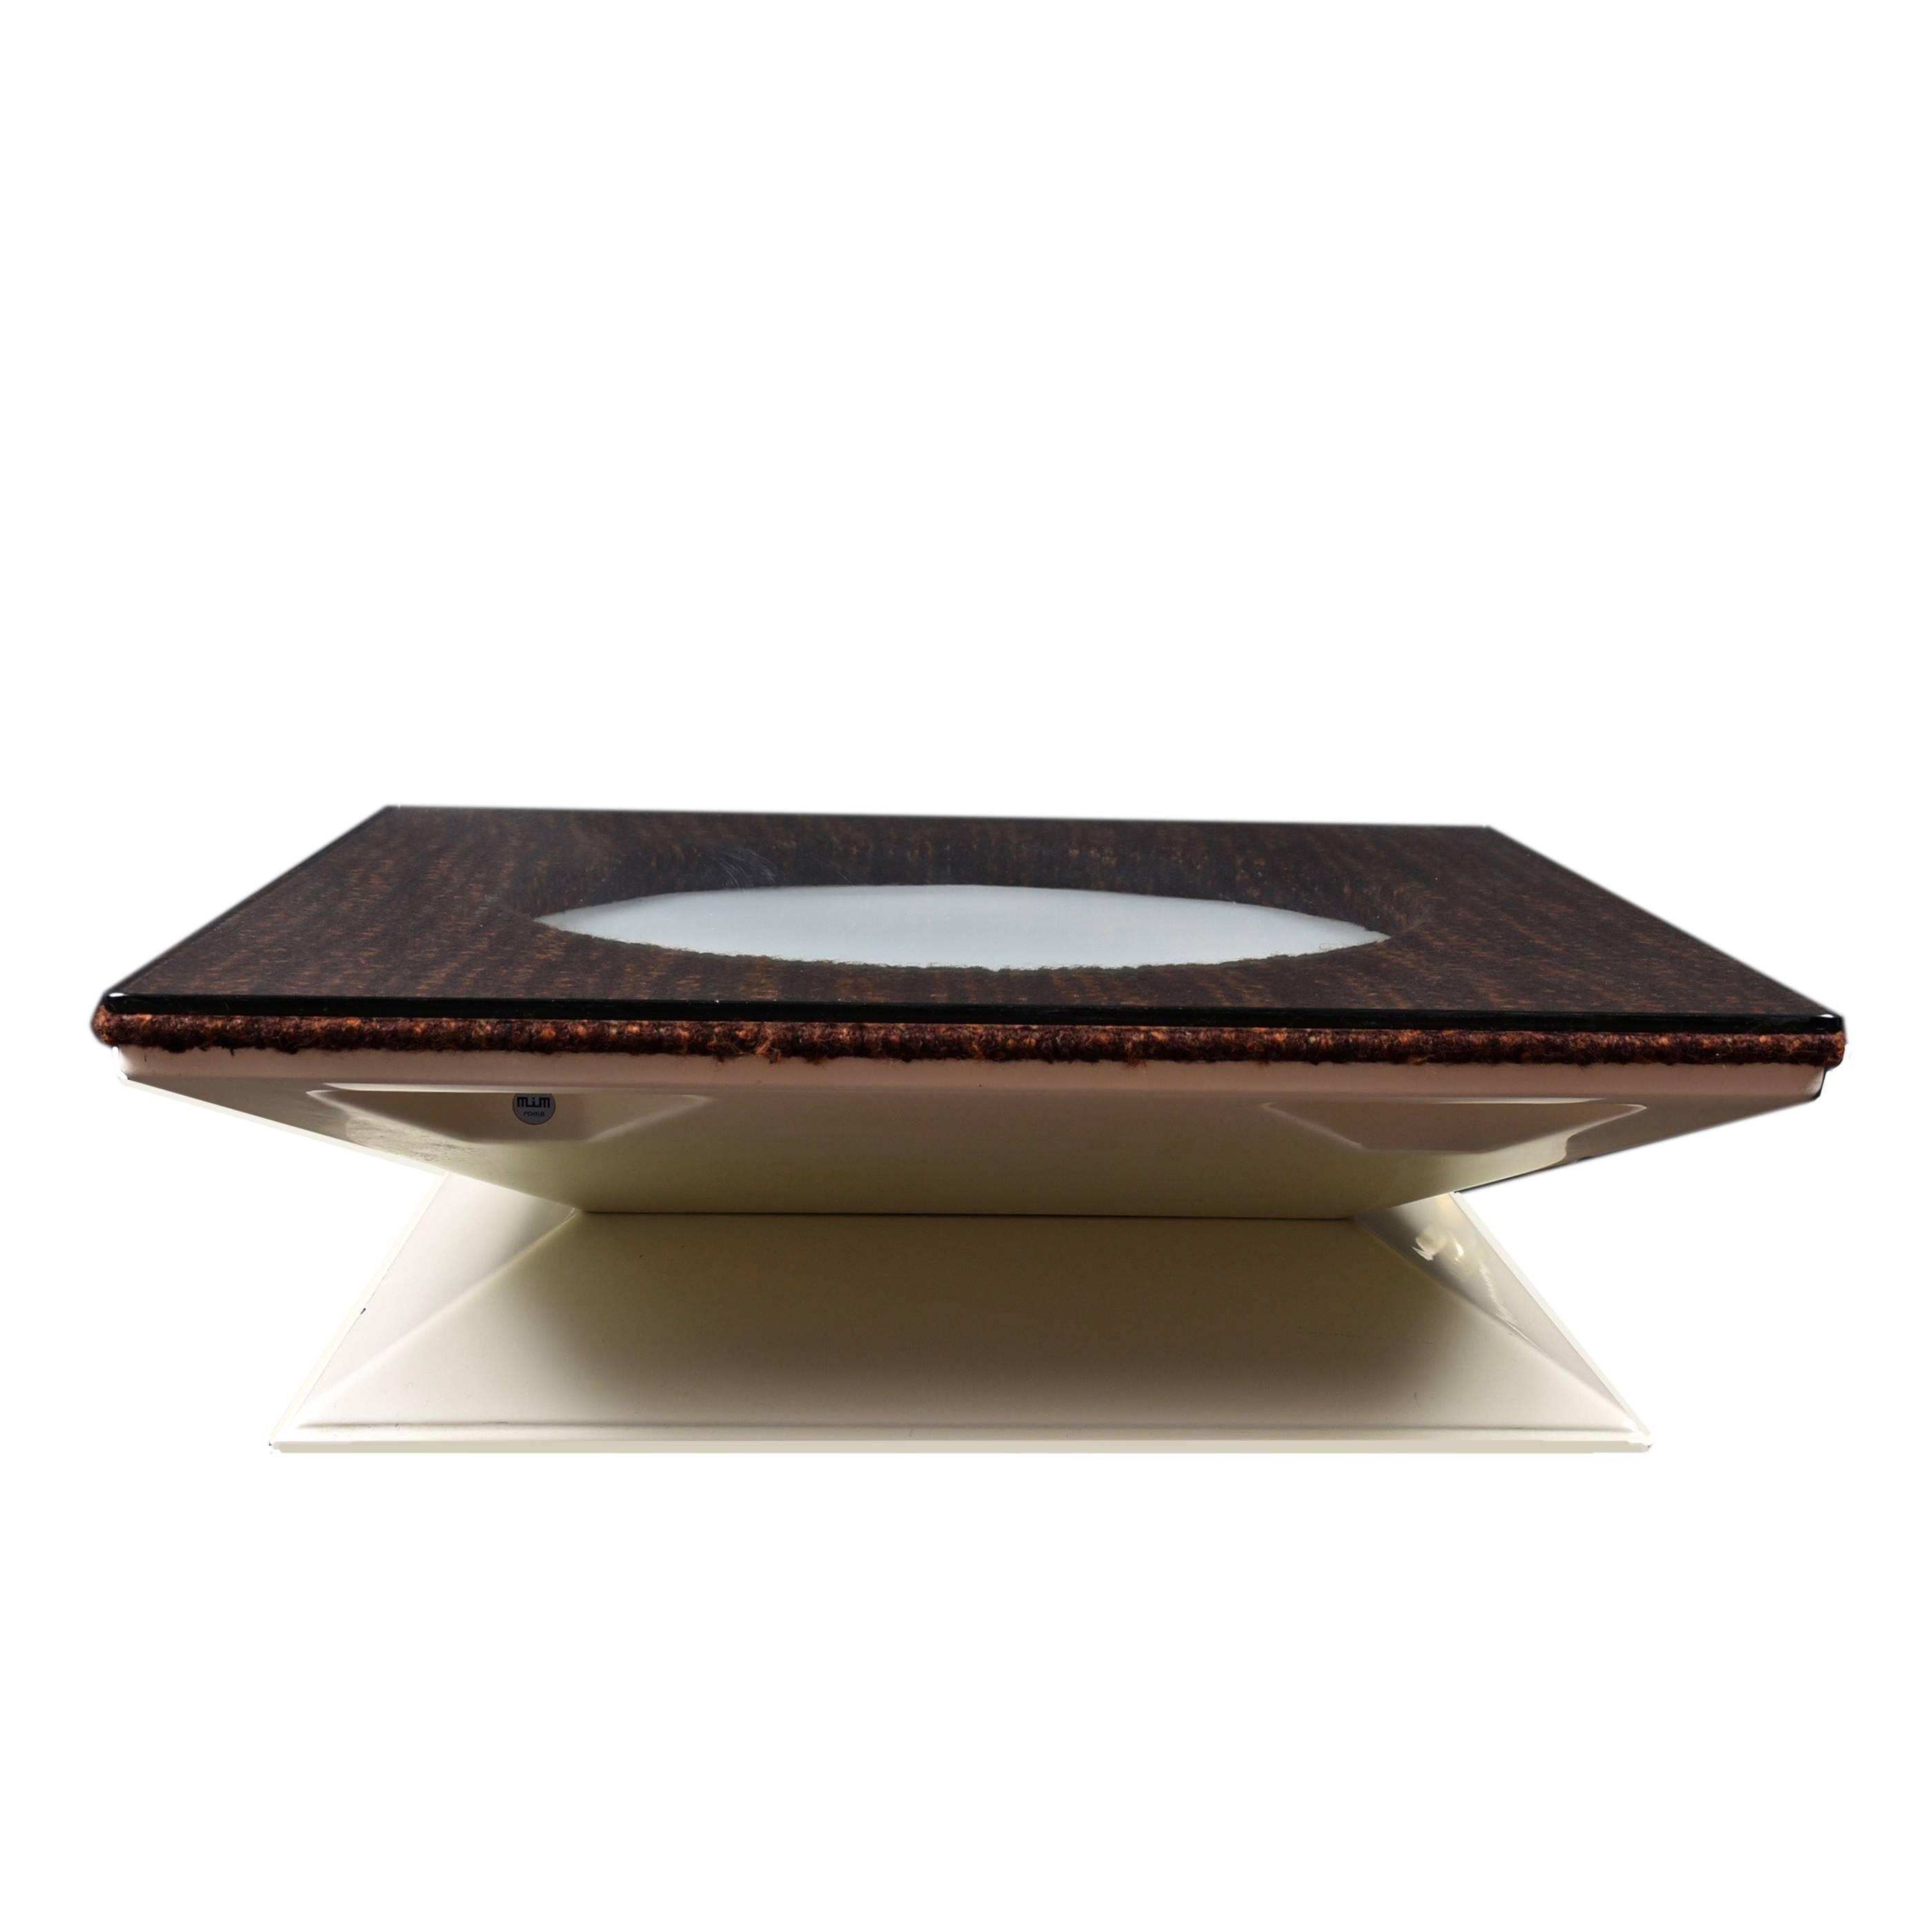 This coffee table was produced by M.I.M. Roma in the 1970s and has an illuminating circle in the center with bouclè.